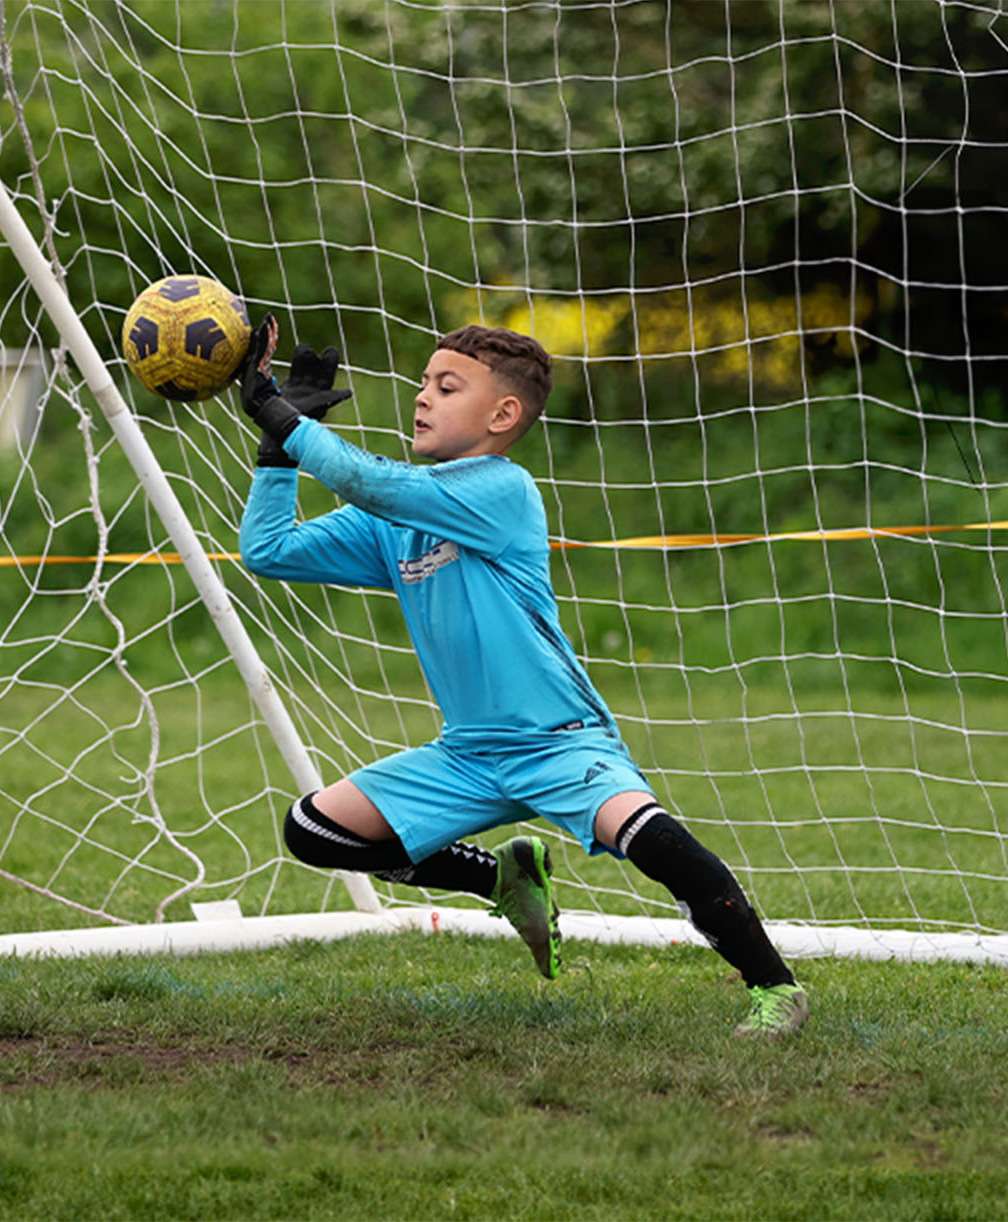 A young goalkeeper saves the ball, pushing a shot away with the palm of his left hand.